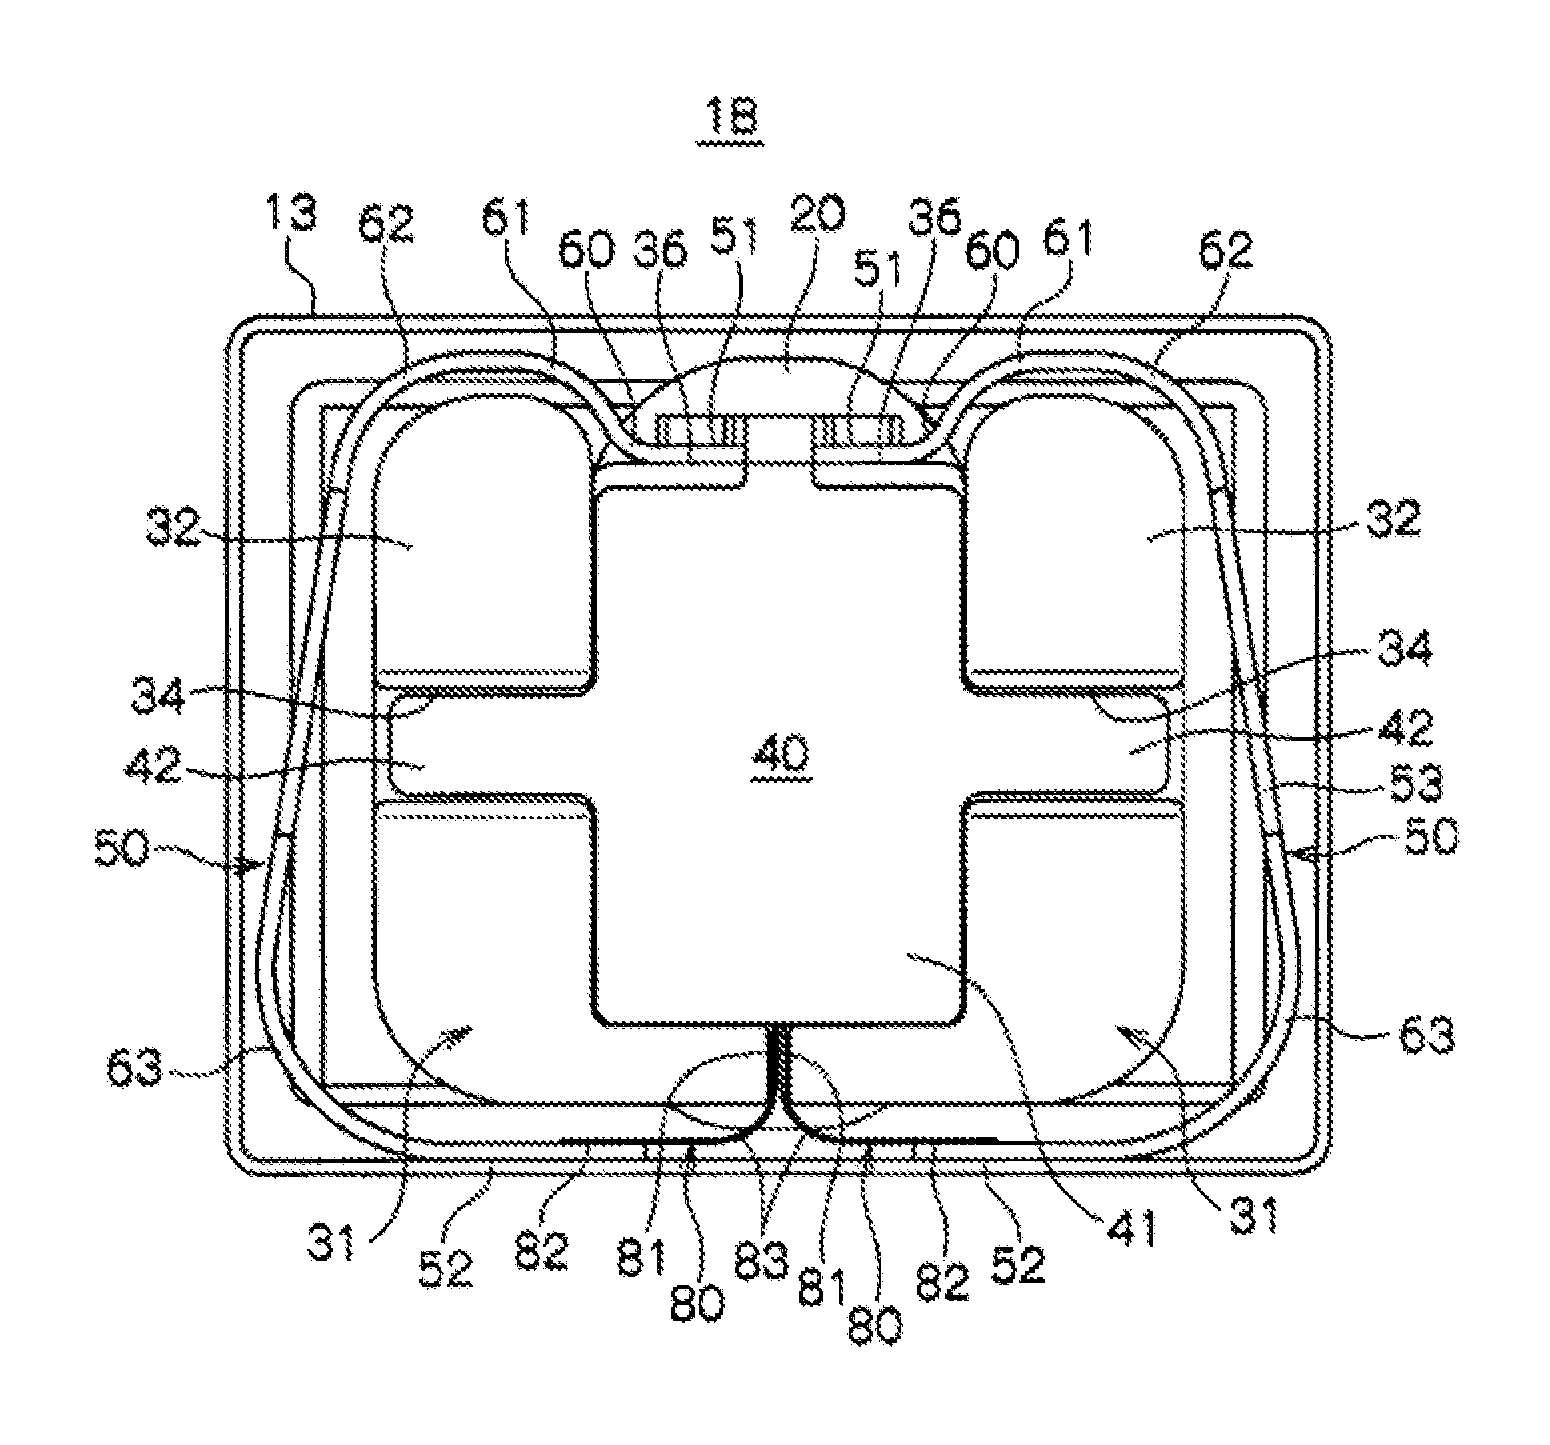 Vibration generator having damping members for a vibrating body and leaf spring